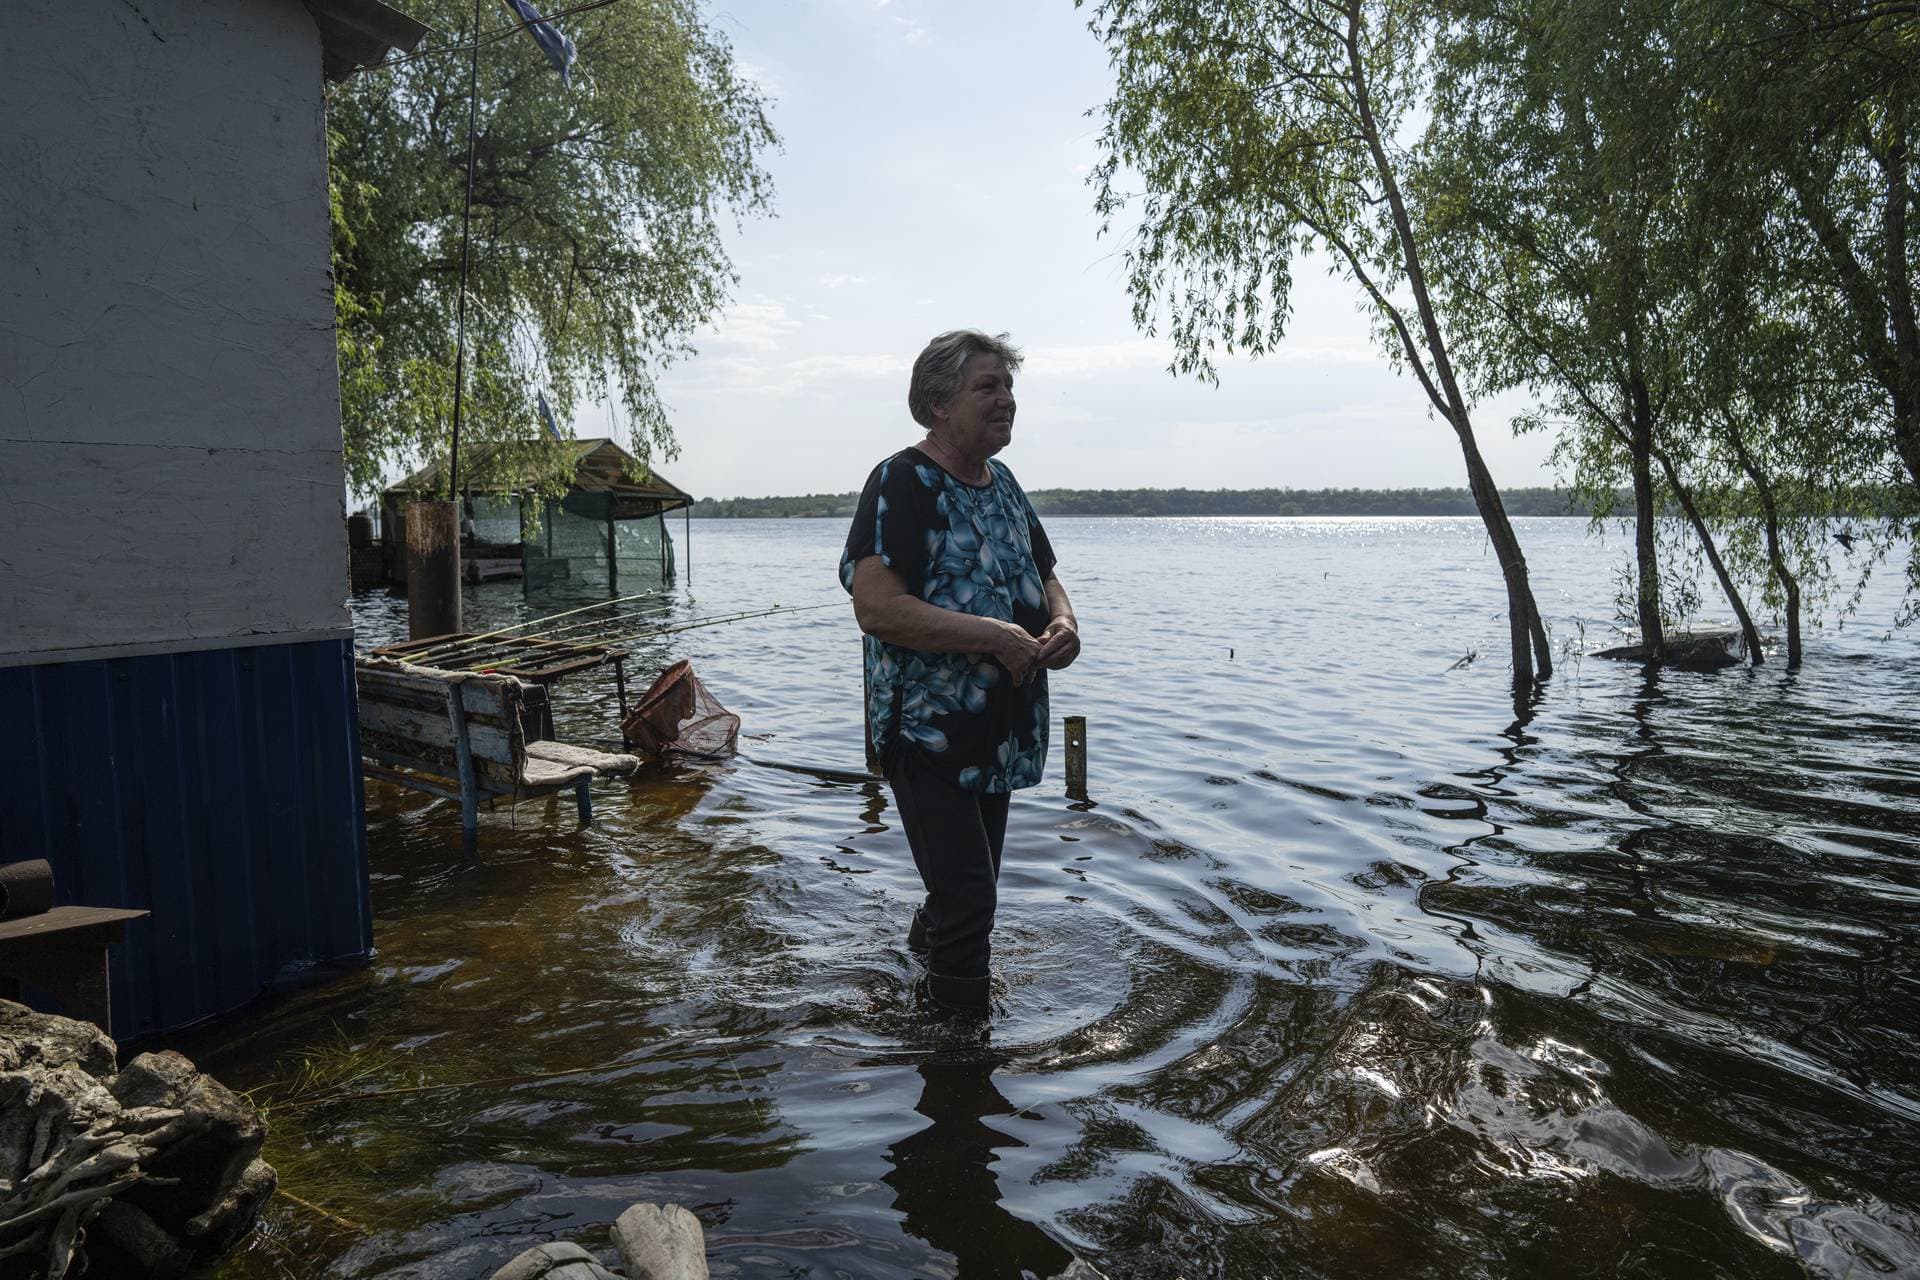 Lyudmila Kulachok stands in the flooded courtyard of her house on an island at Kakhovka Reservoir on Dnipro River